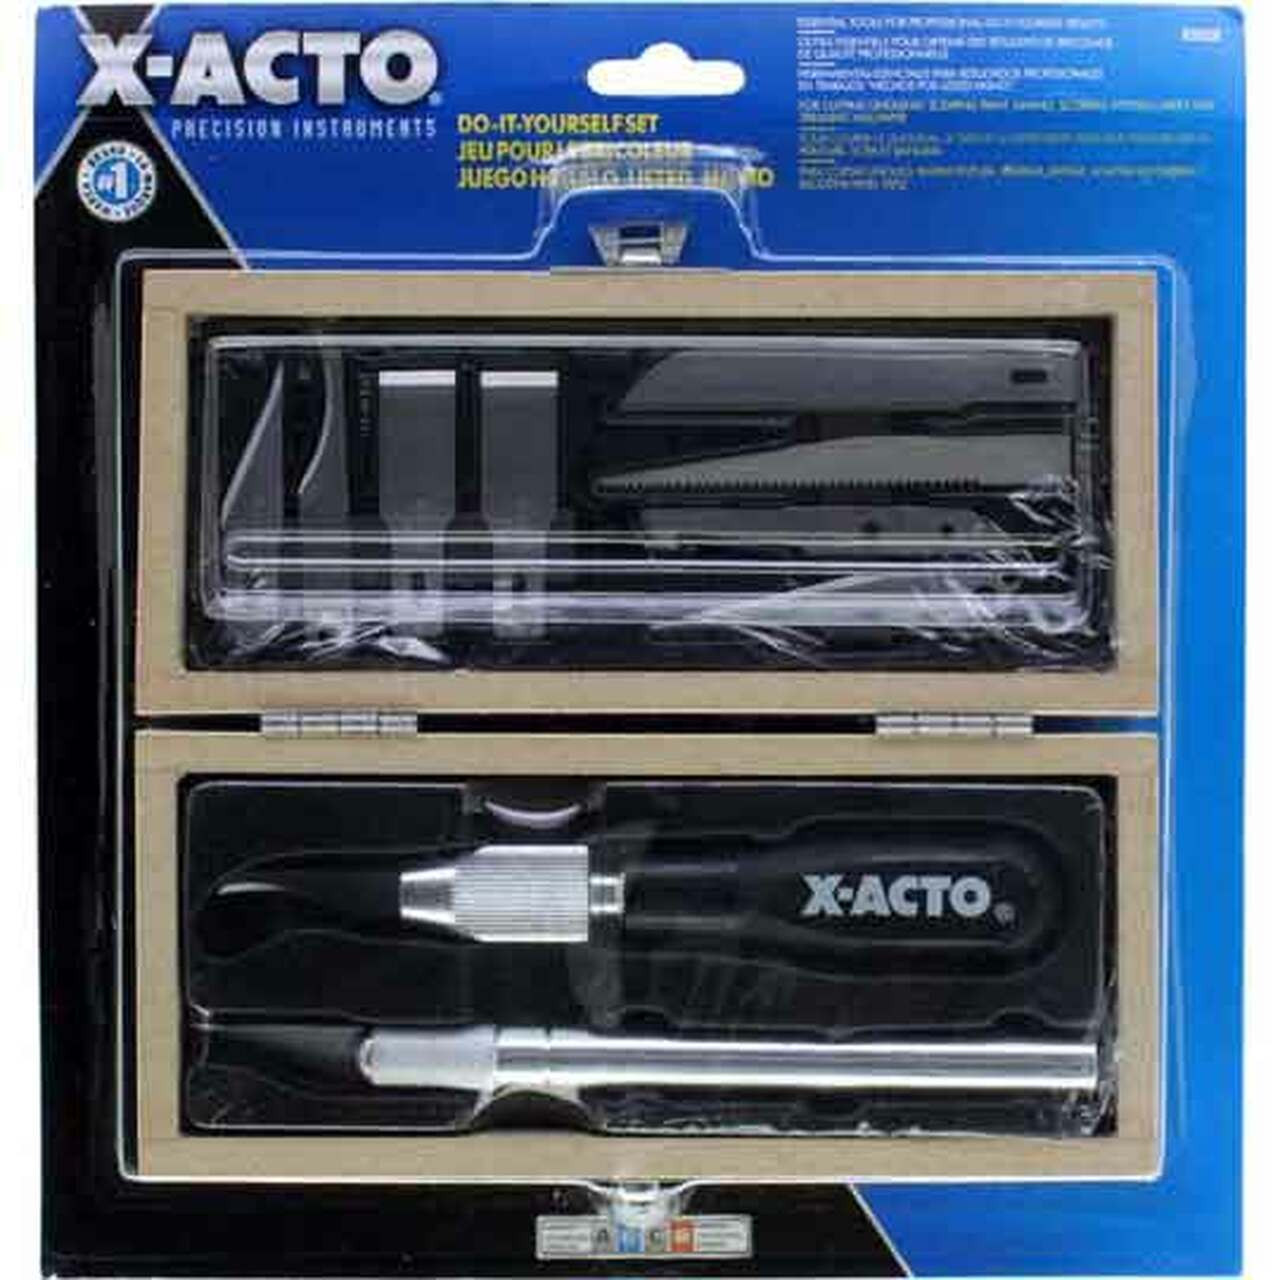 X-Acto Blade #2 Large Fine Point 5pc